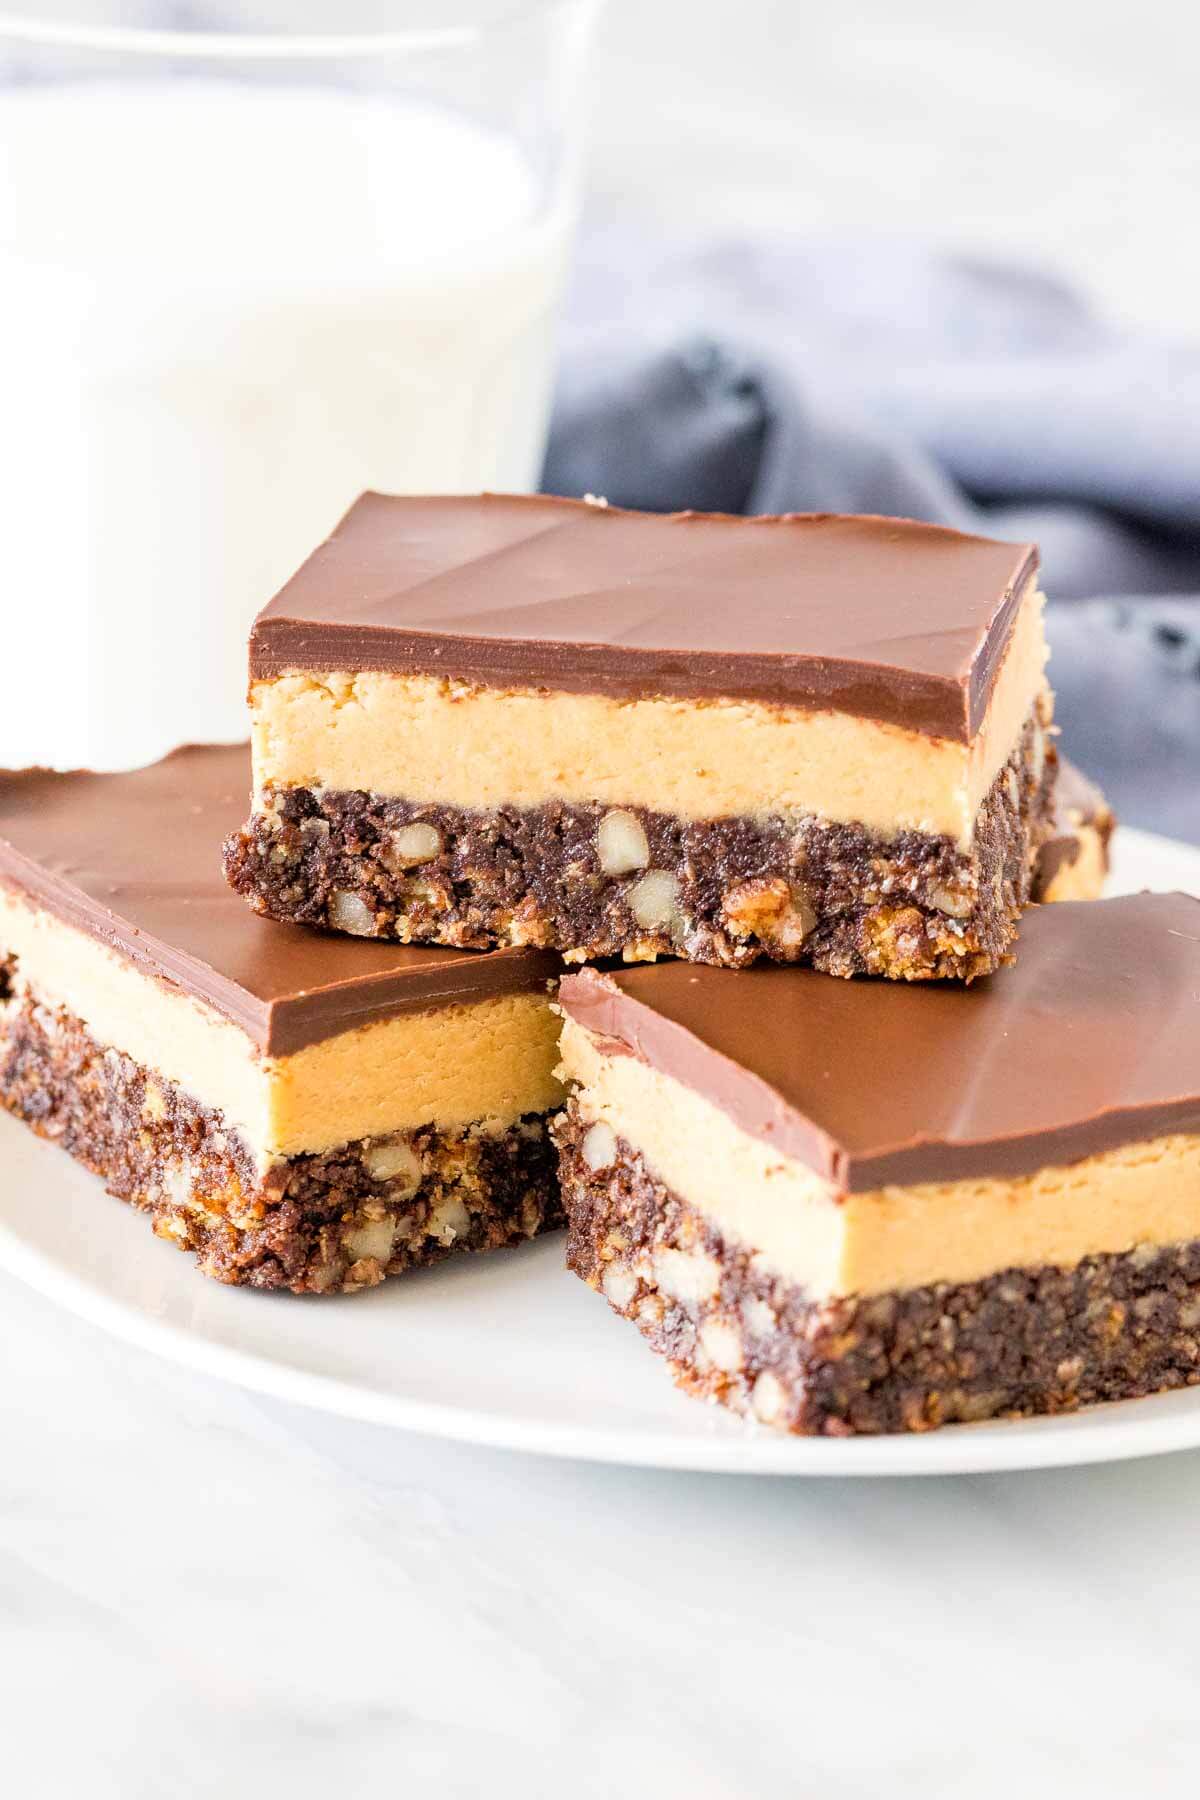 Plate of nanaimo bars with peanut butte rfilling. 